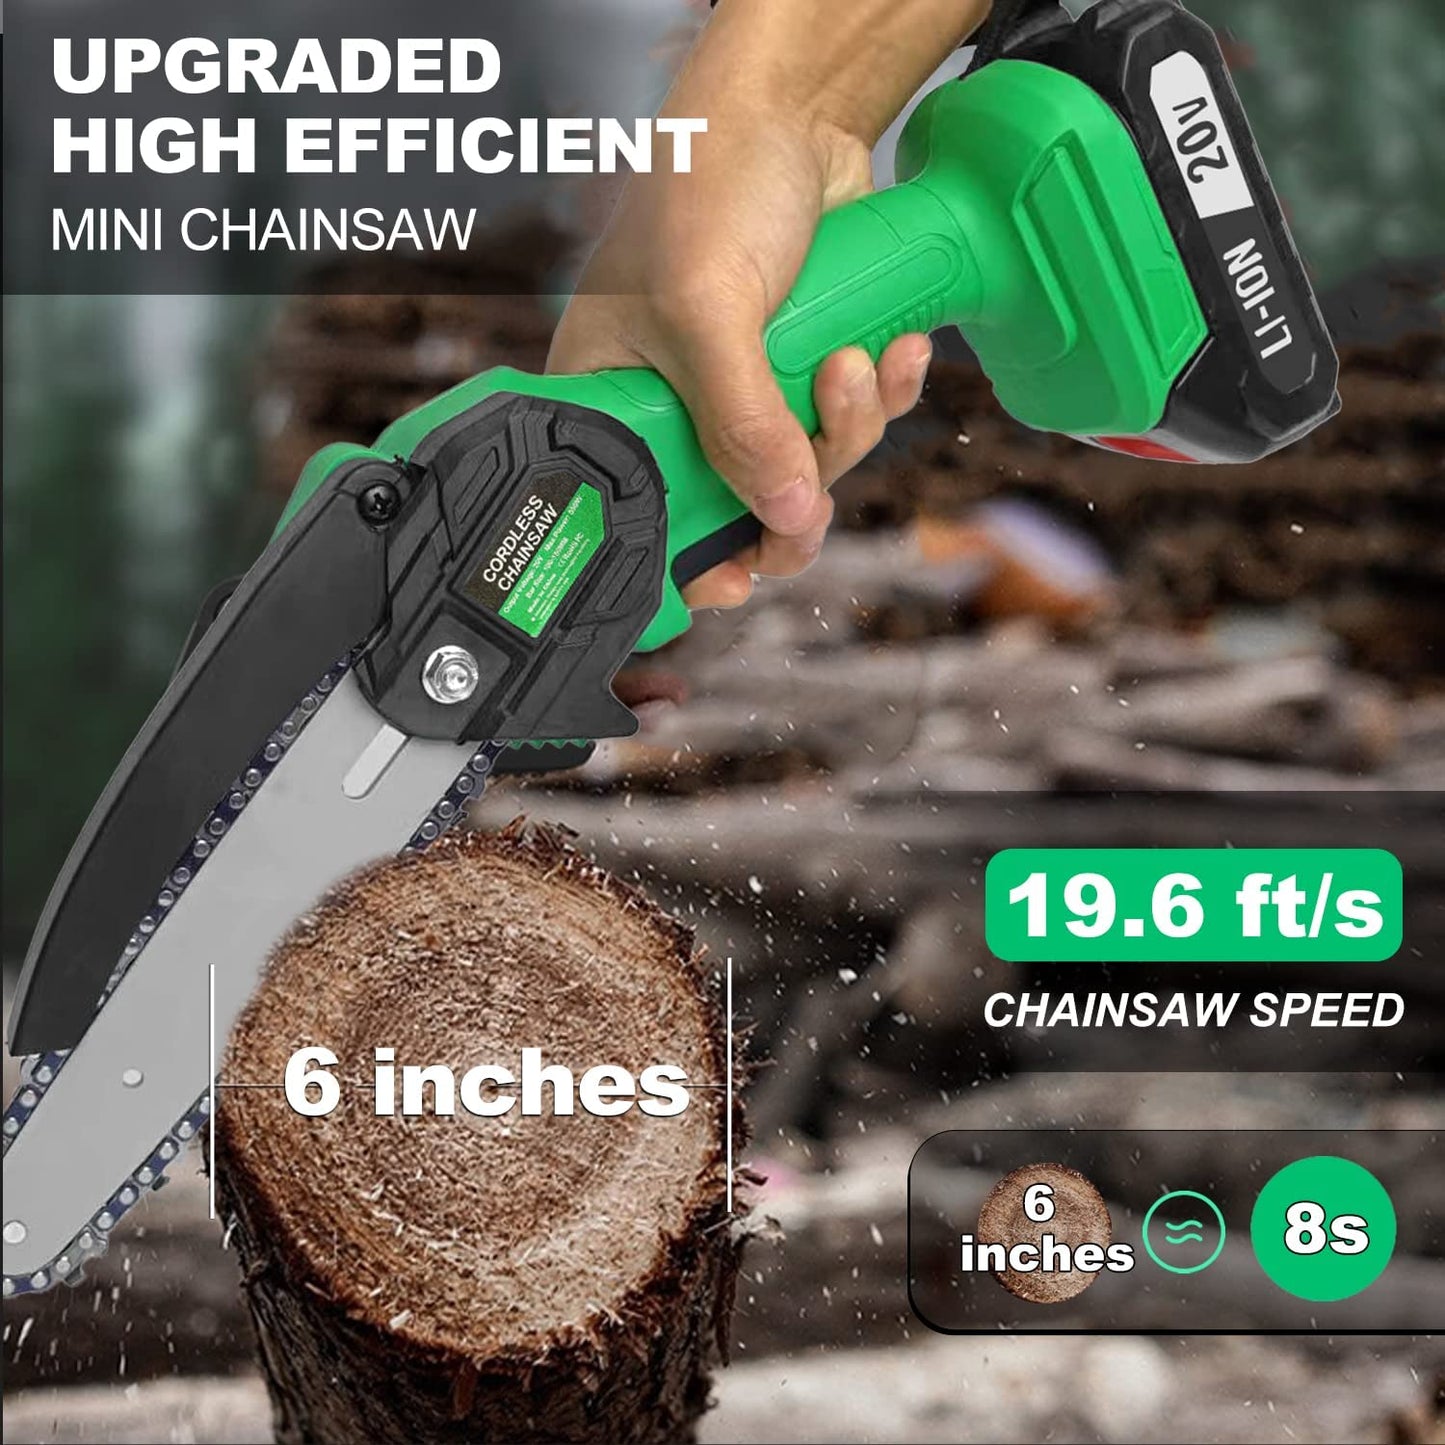 Mini Chainsaw 6 Inch 2 Batteries, 2 Chains, LED Light, Lightweight, Tree Branches, Wood Cutting